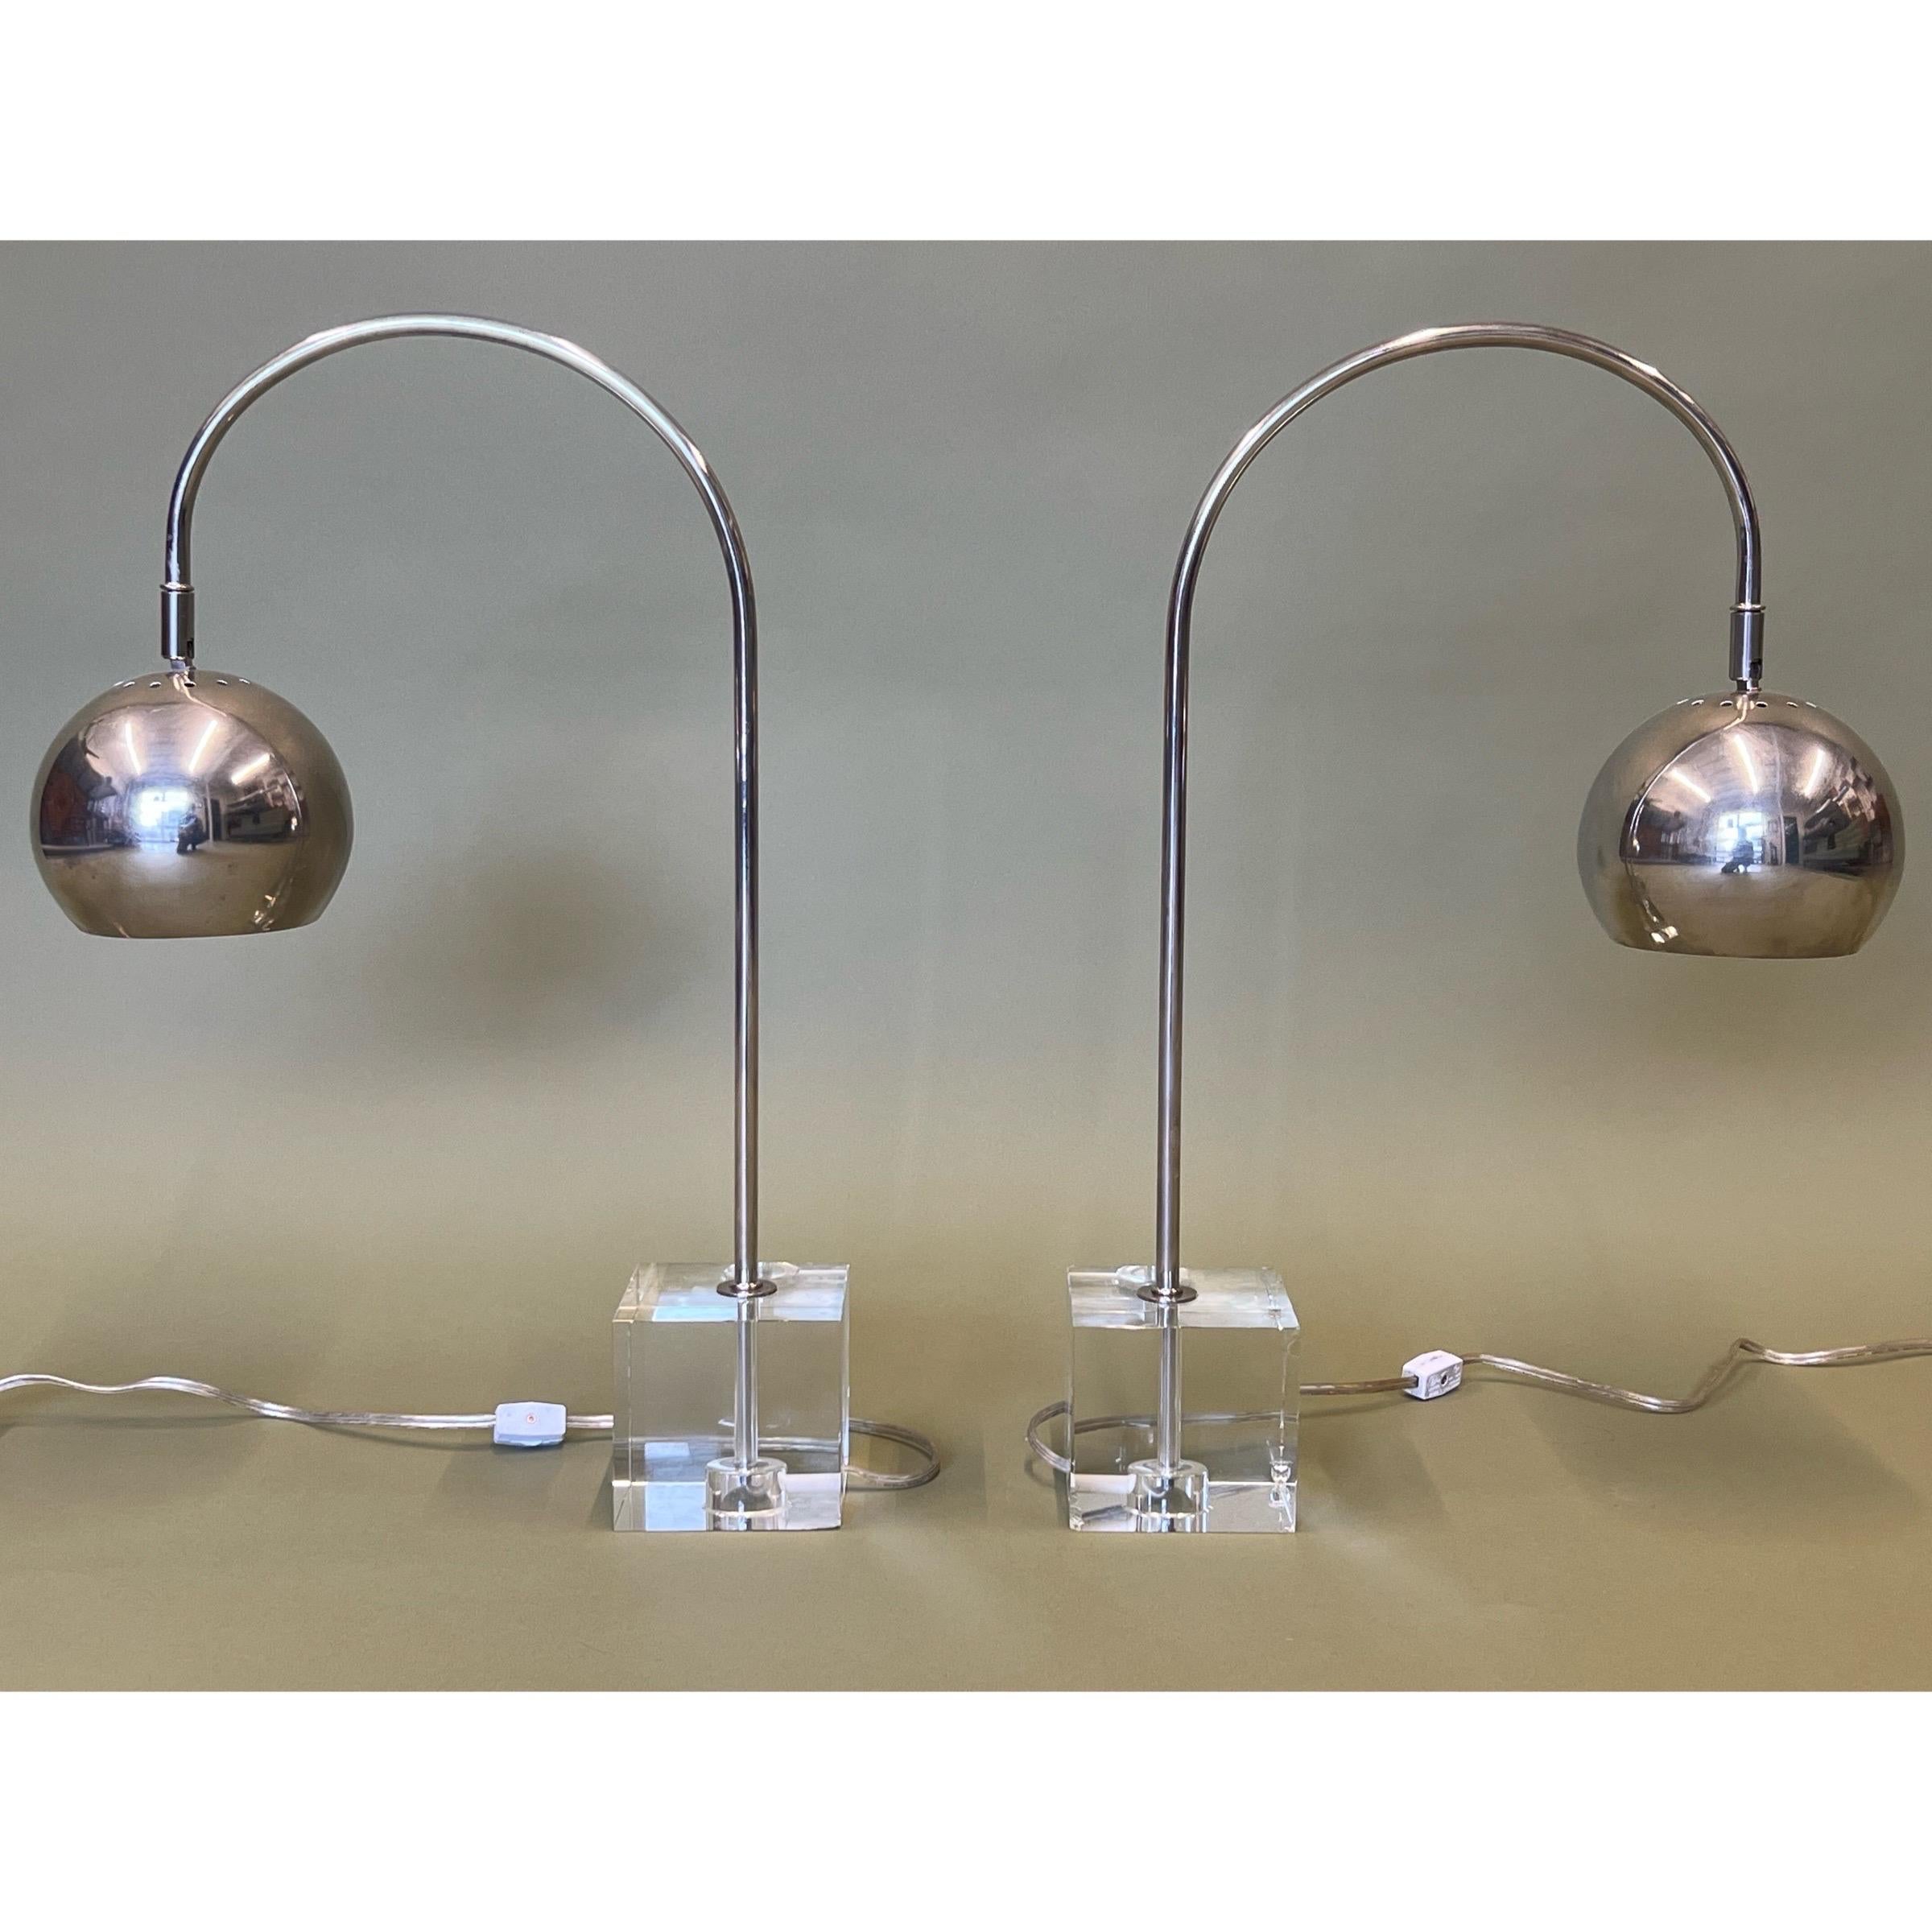 Pair of vintage lamps made by Drexel Heritage. This pair models the iconic arch lamp style in miniature form. The square bases are made lucite, therefore are transparent. The gooseneck stem and eyeball shade are chrome. The eyeball shade does adjust